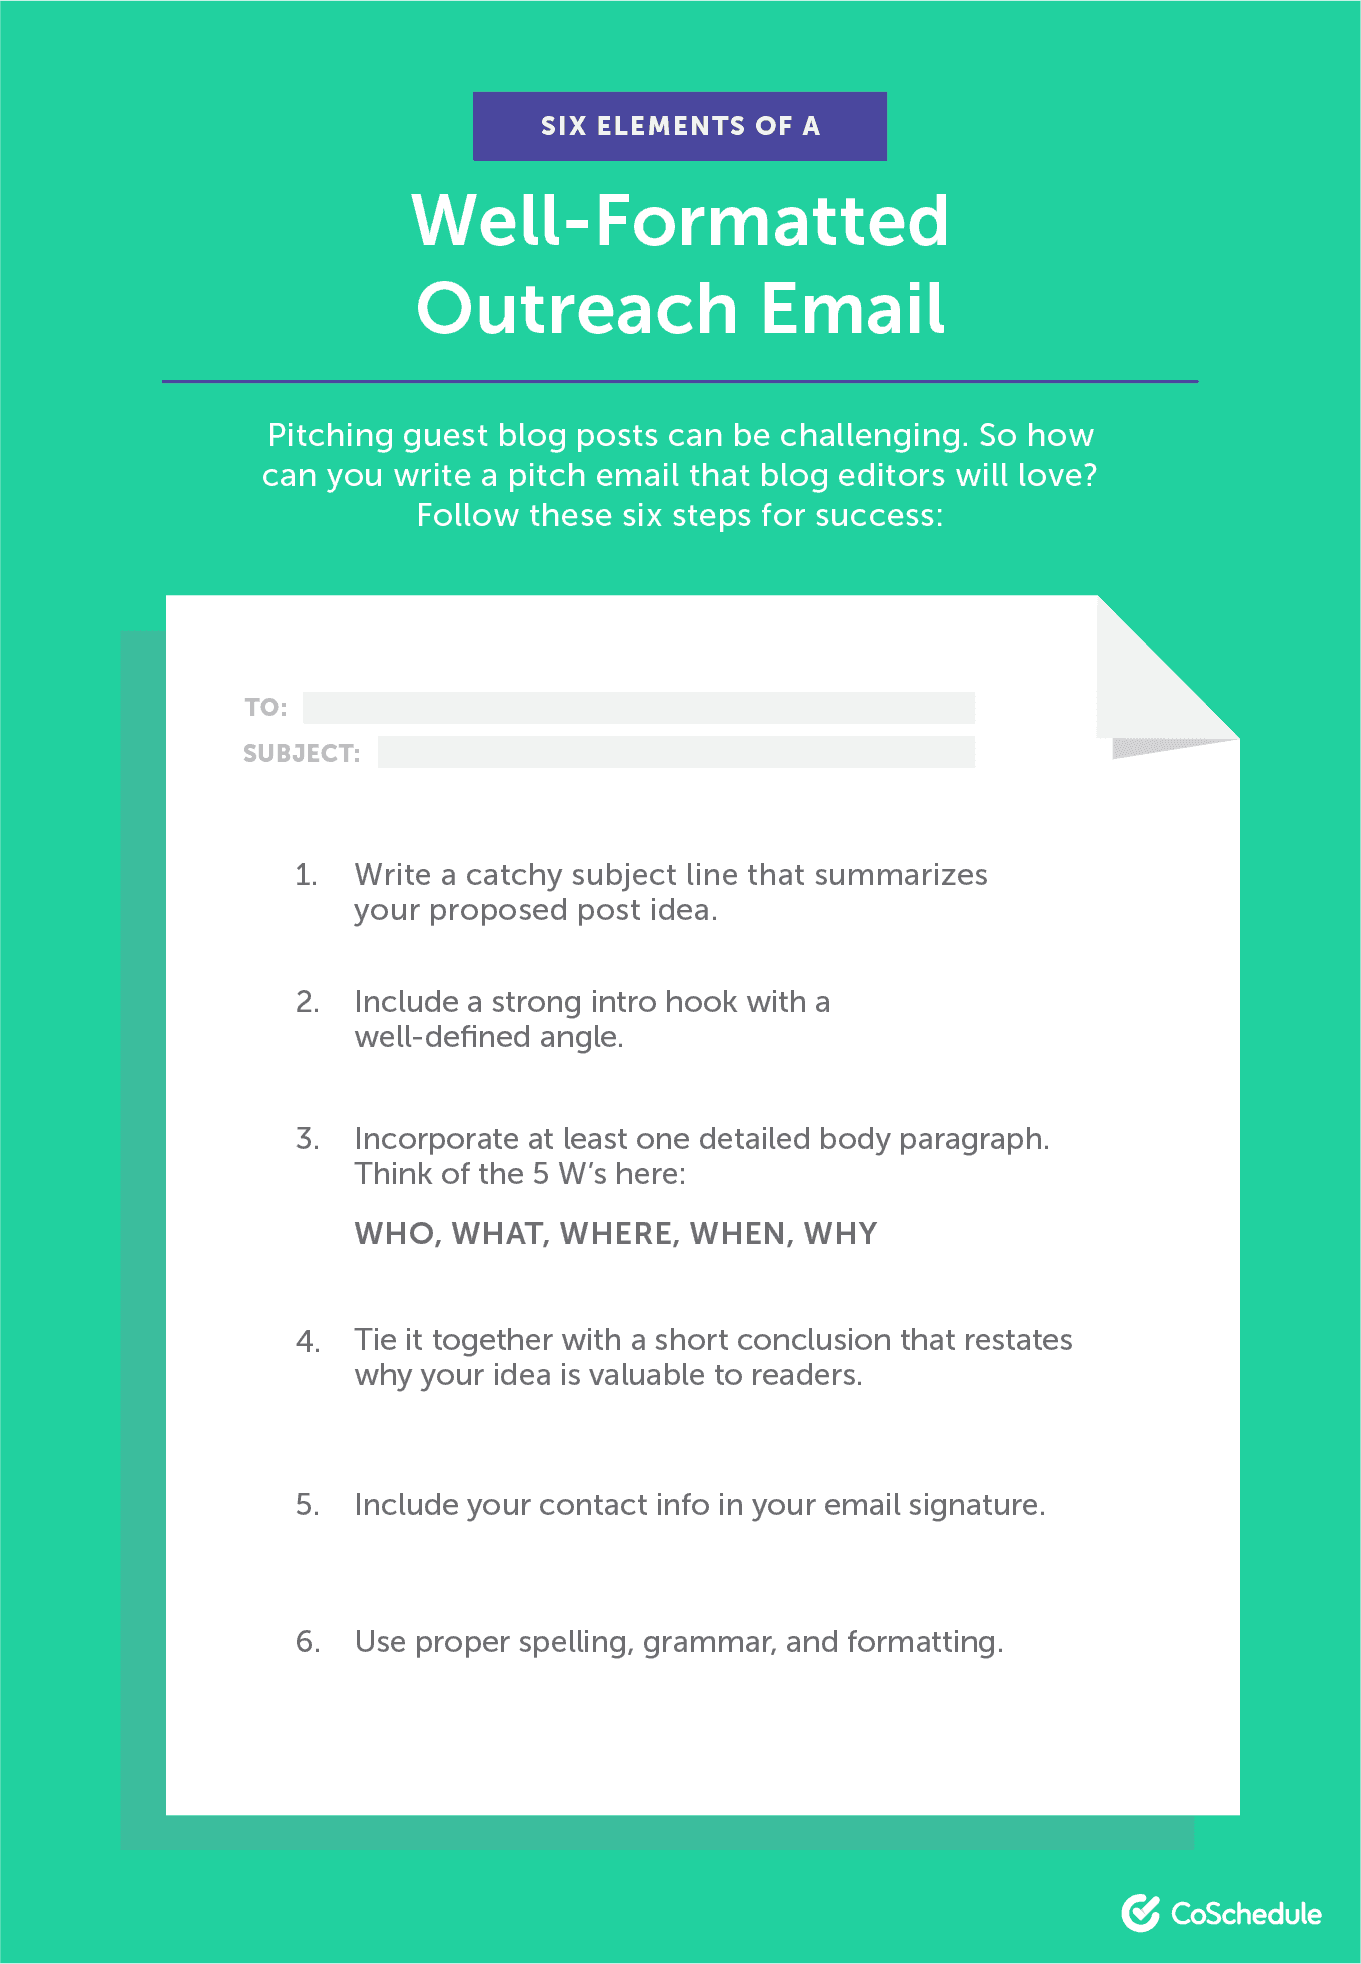 A list of six elements that make up a well-formatted outreach email